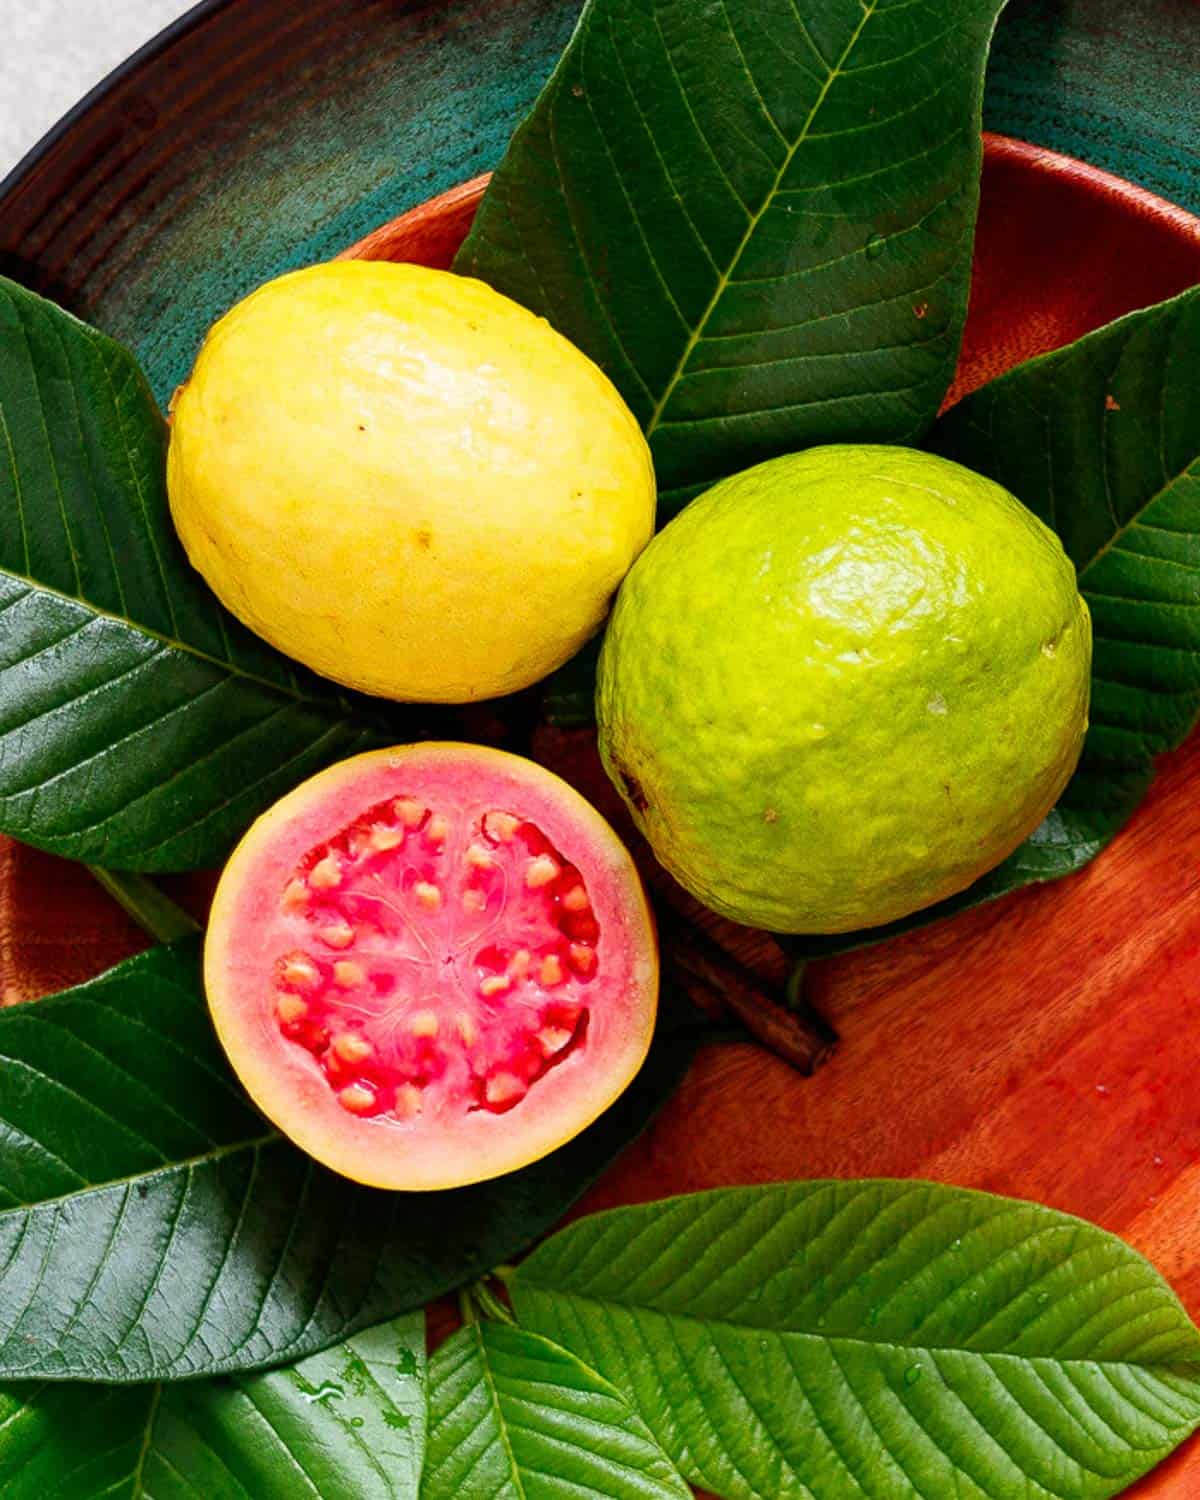 Guavas, yellow, green and cut in half showing pink pulp and seeds.